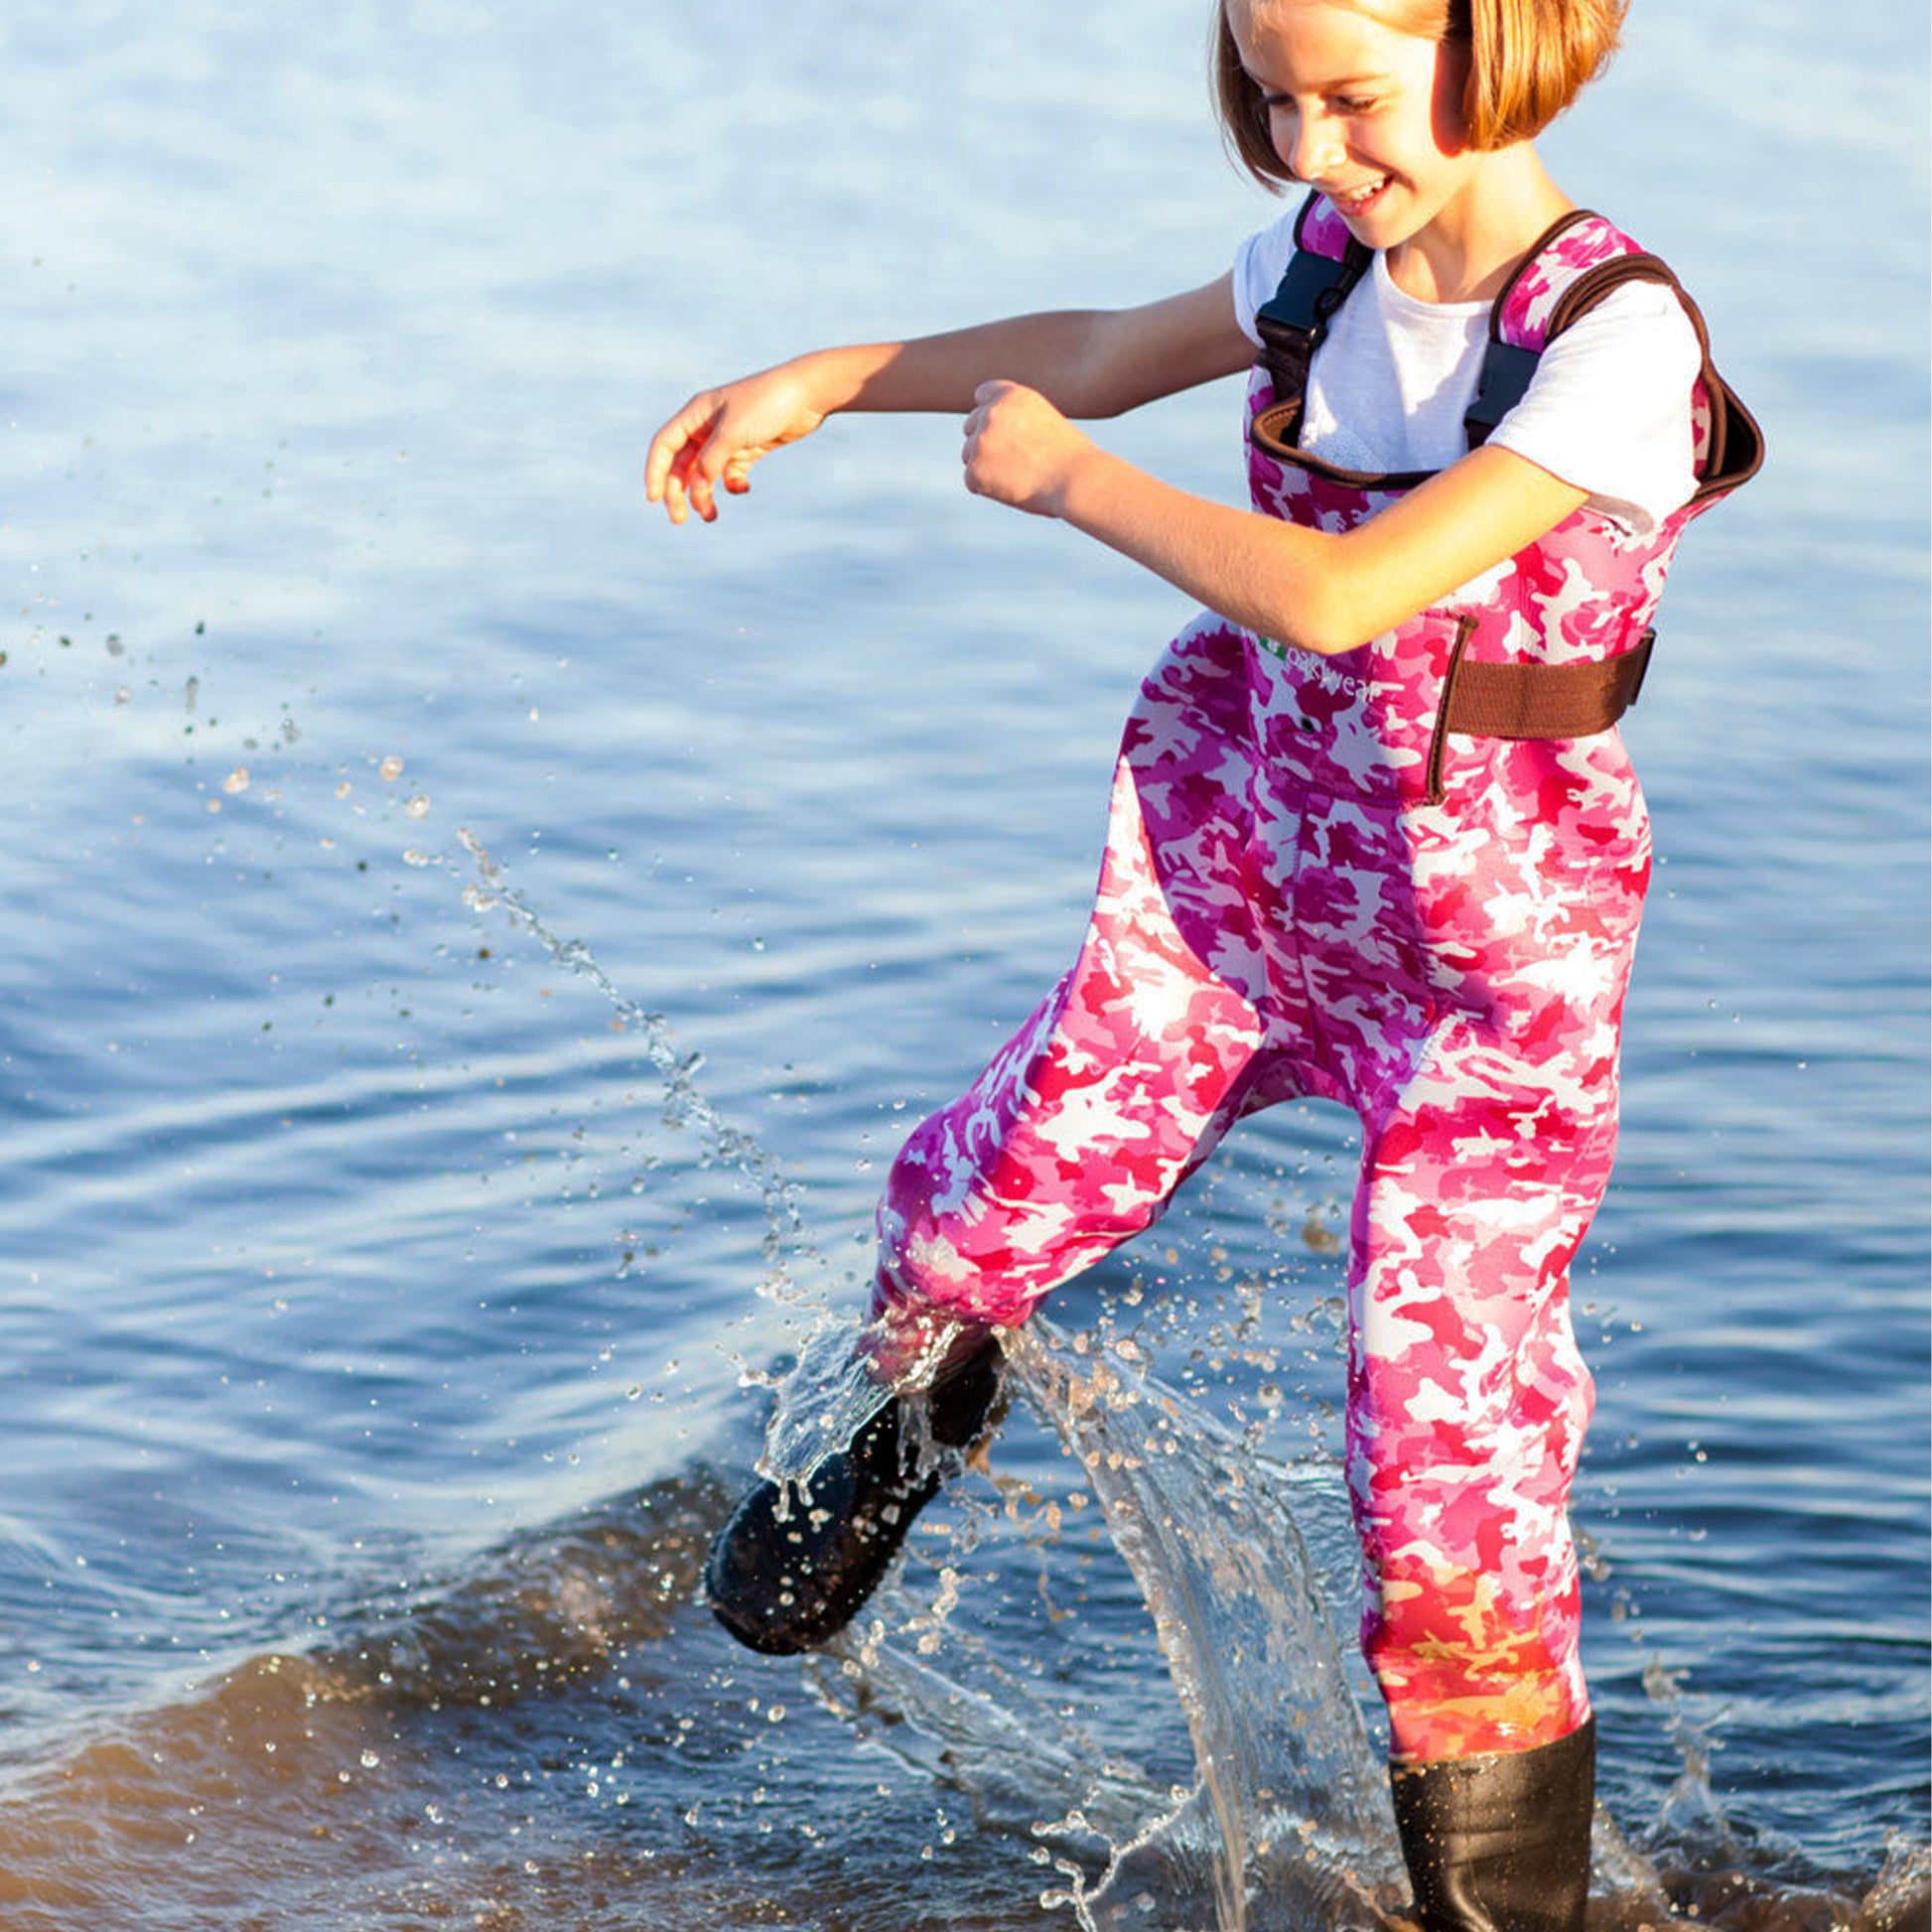 Fishing chest waders for Kids, Waterproof Children's Waders with Non-Slip  Boots, Children Playing Water Clothes, Suitable for Playing with Water